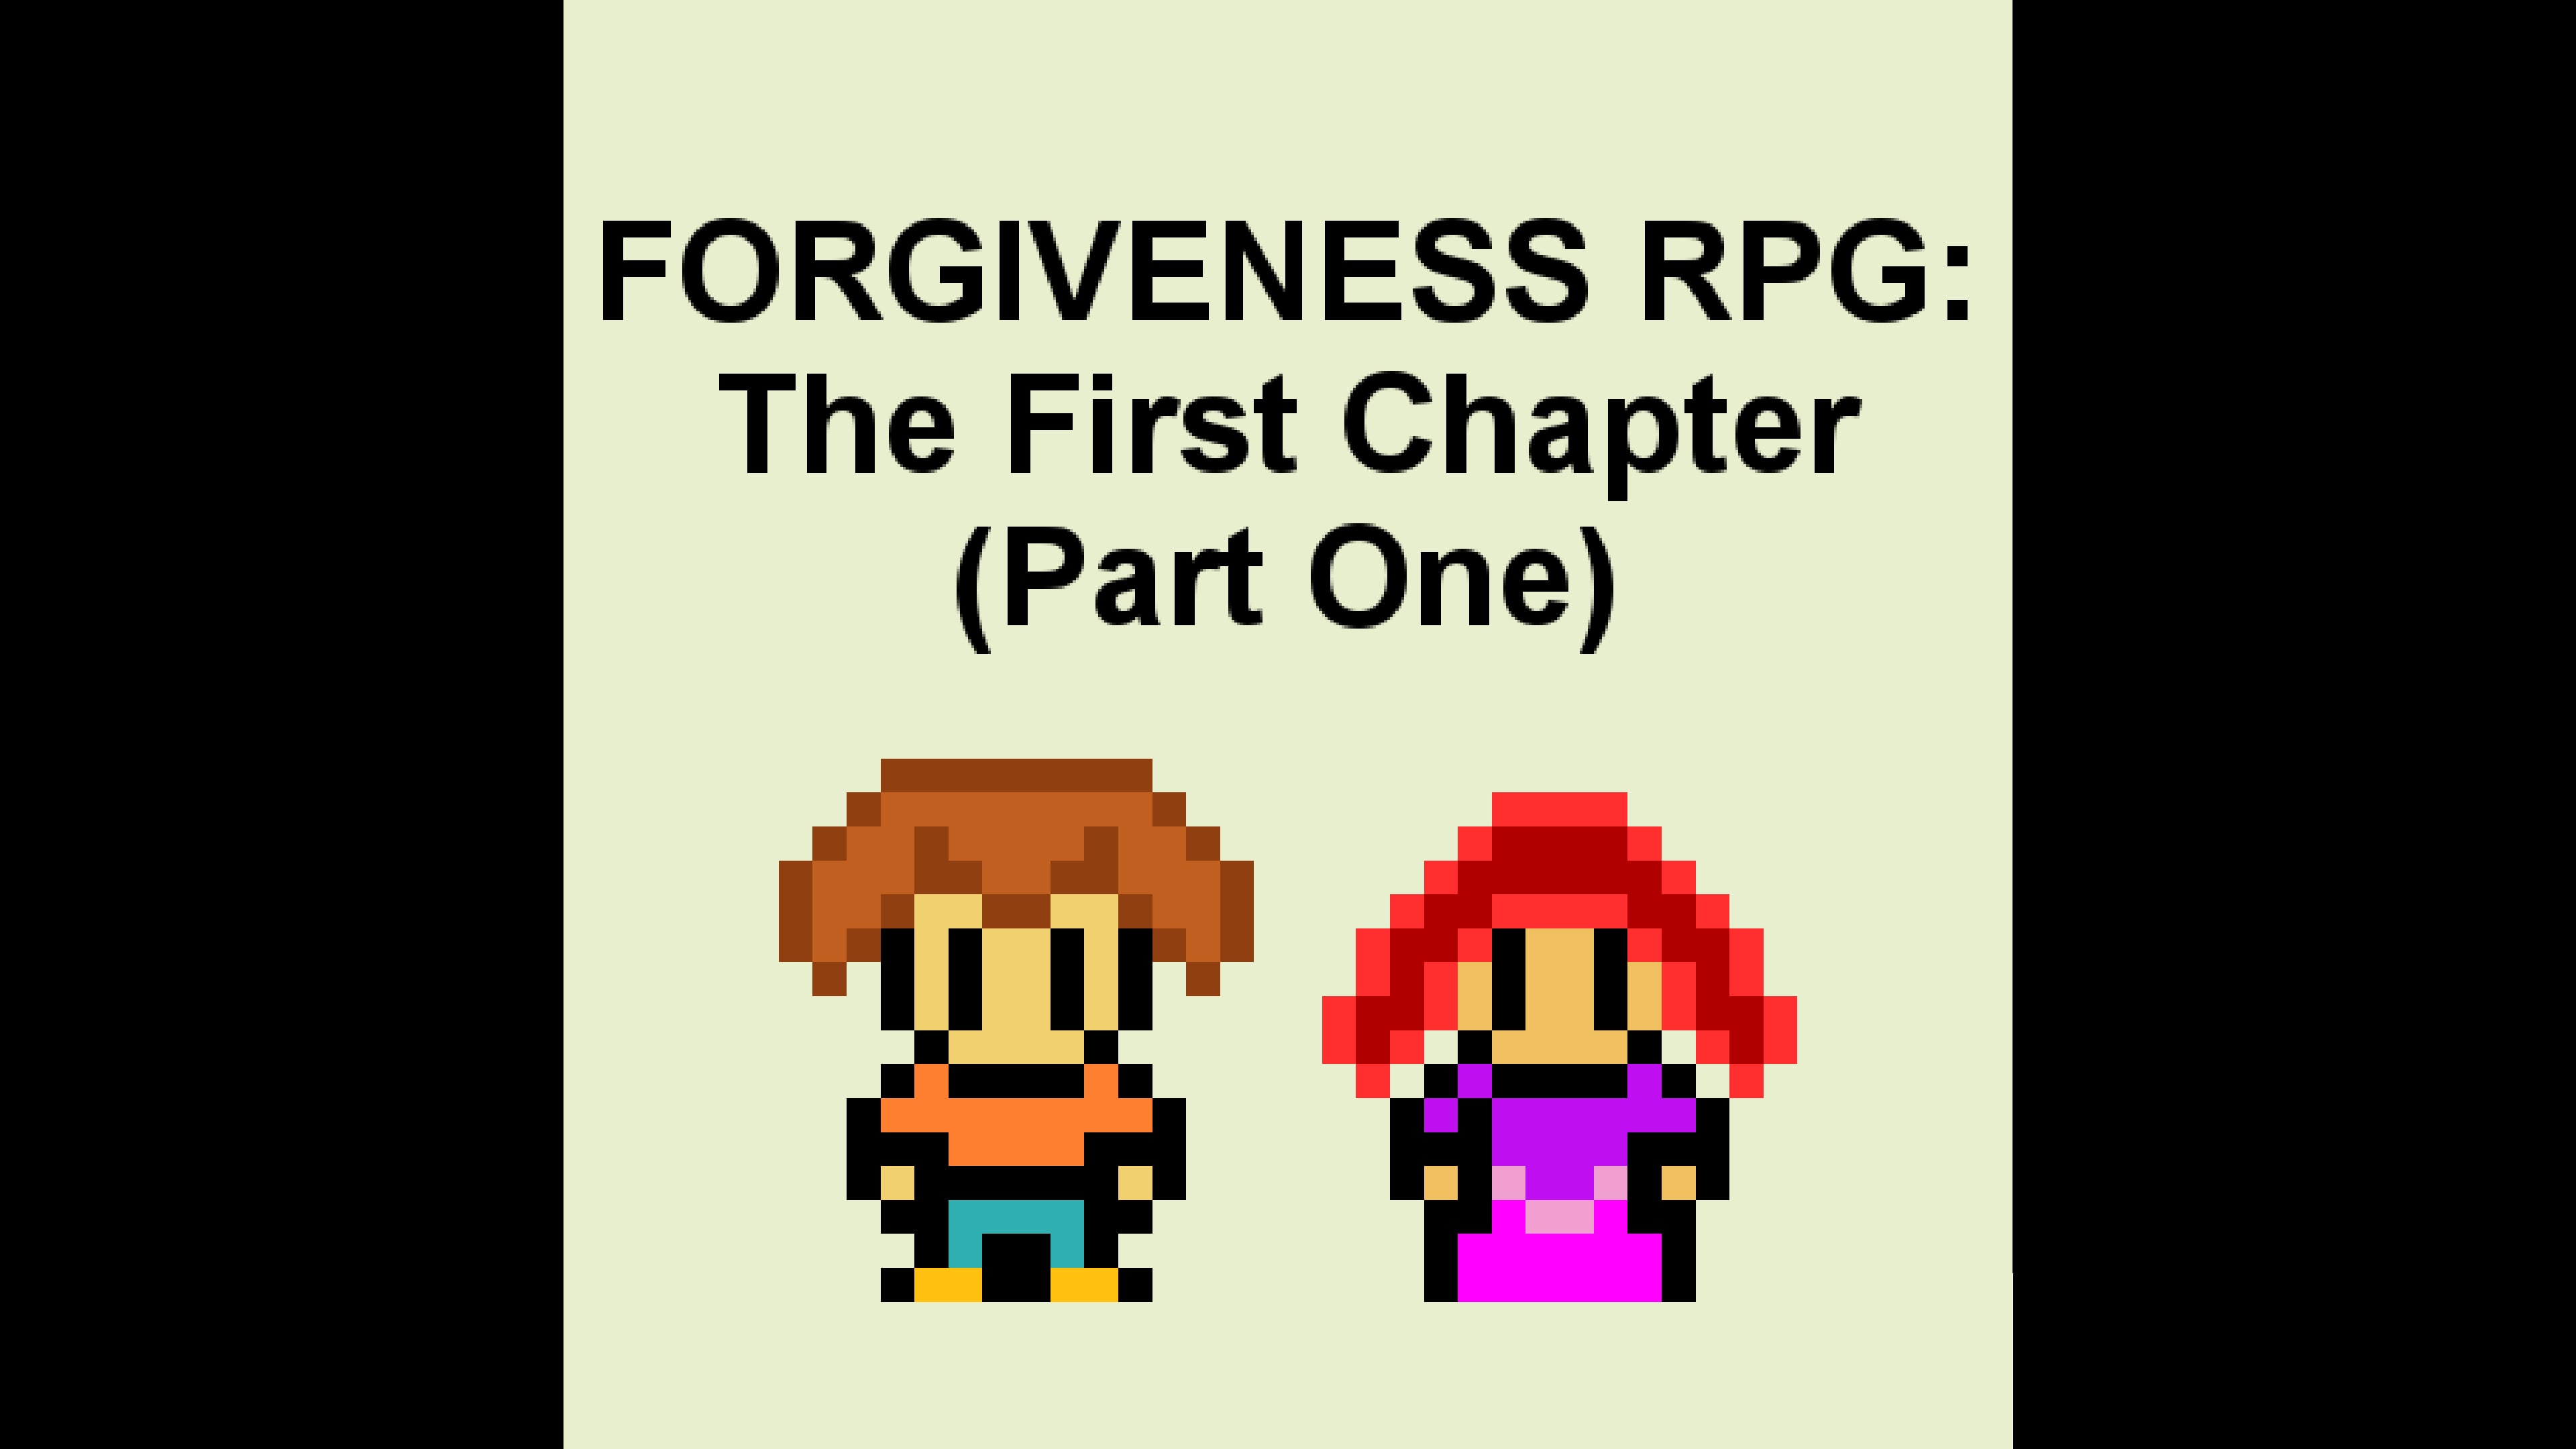 Forgiveness RPG: The First Chapter (Part One)